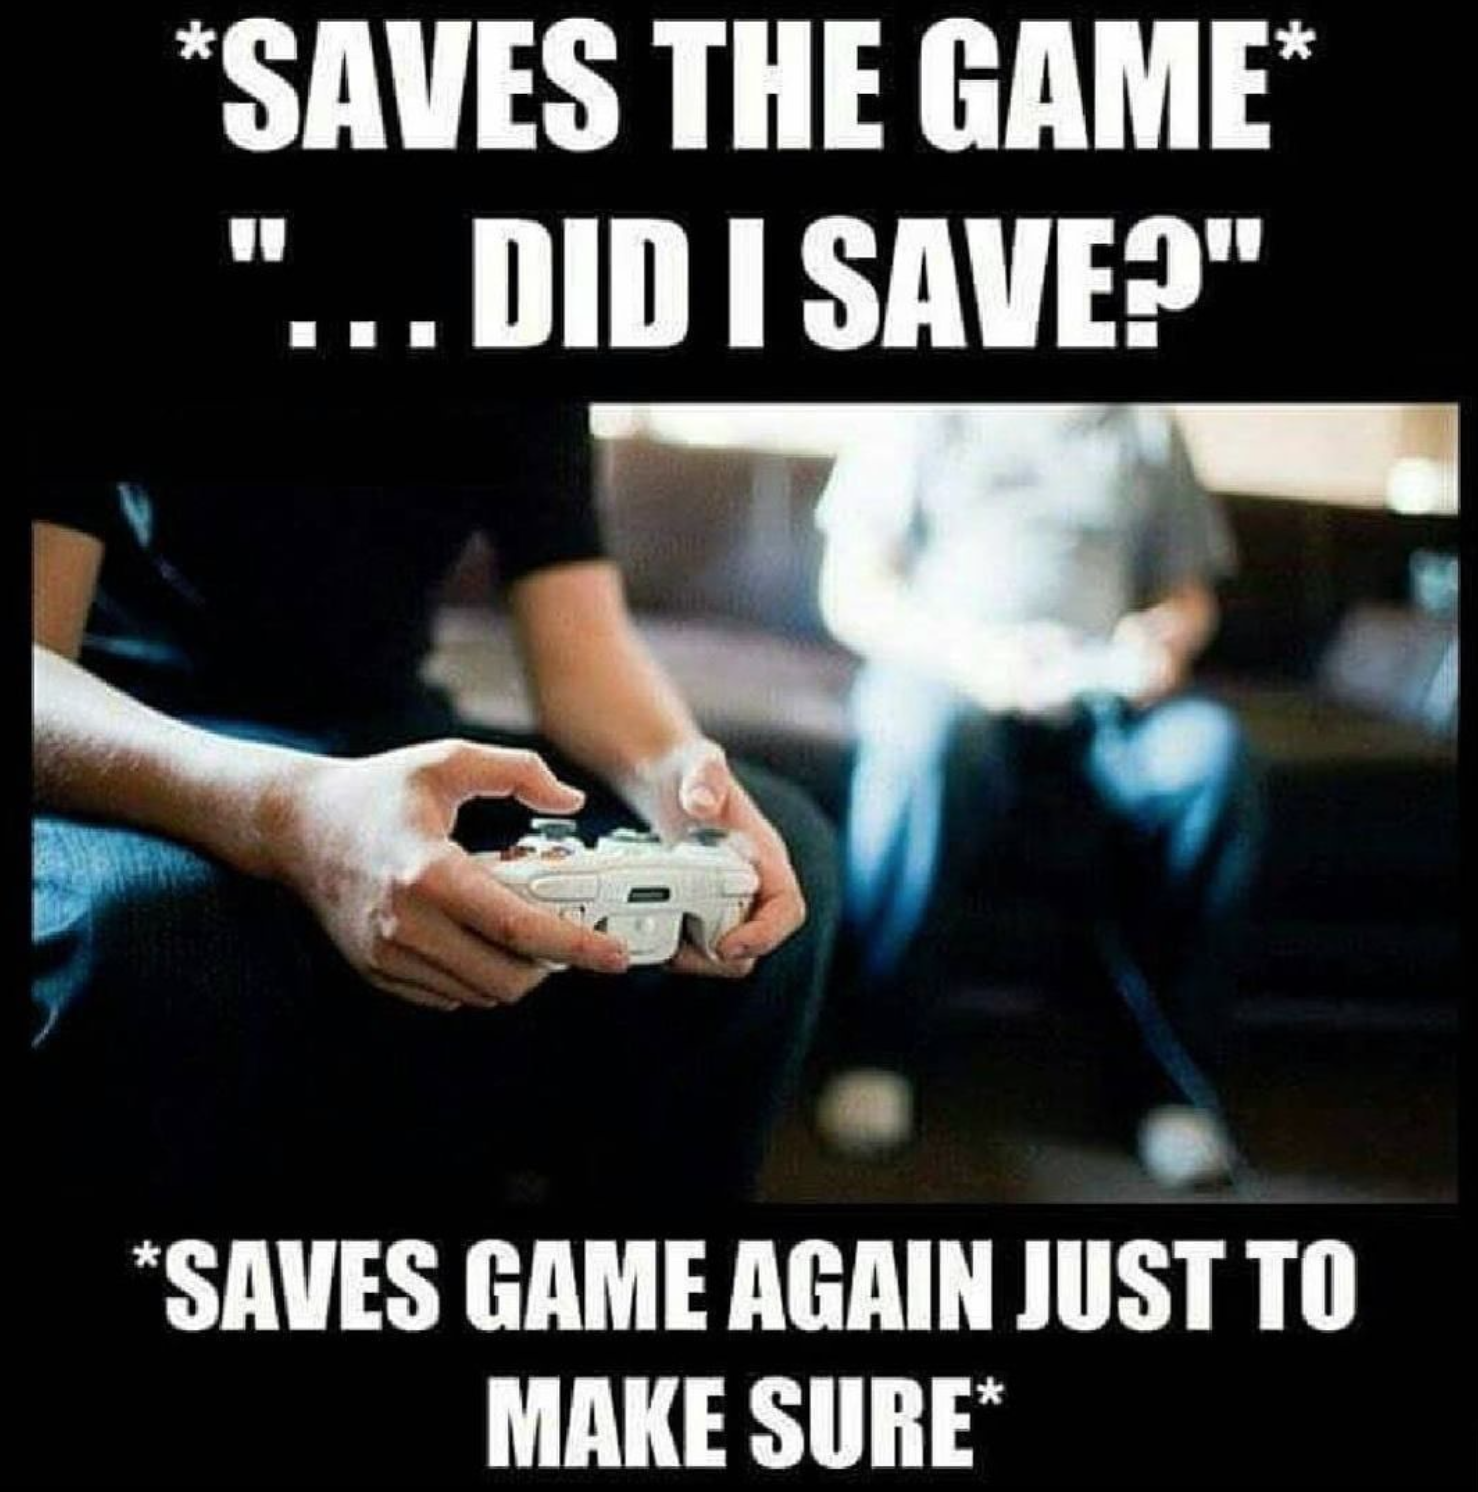 funny gaming memes  - relatable gaming memes - Saves The Game ... Did I Save?